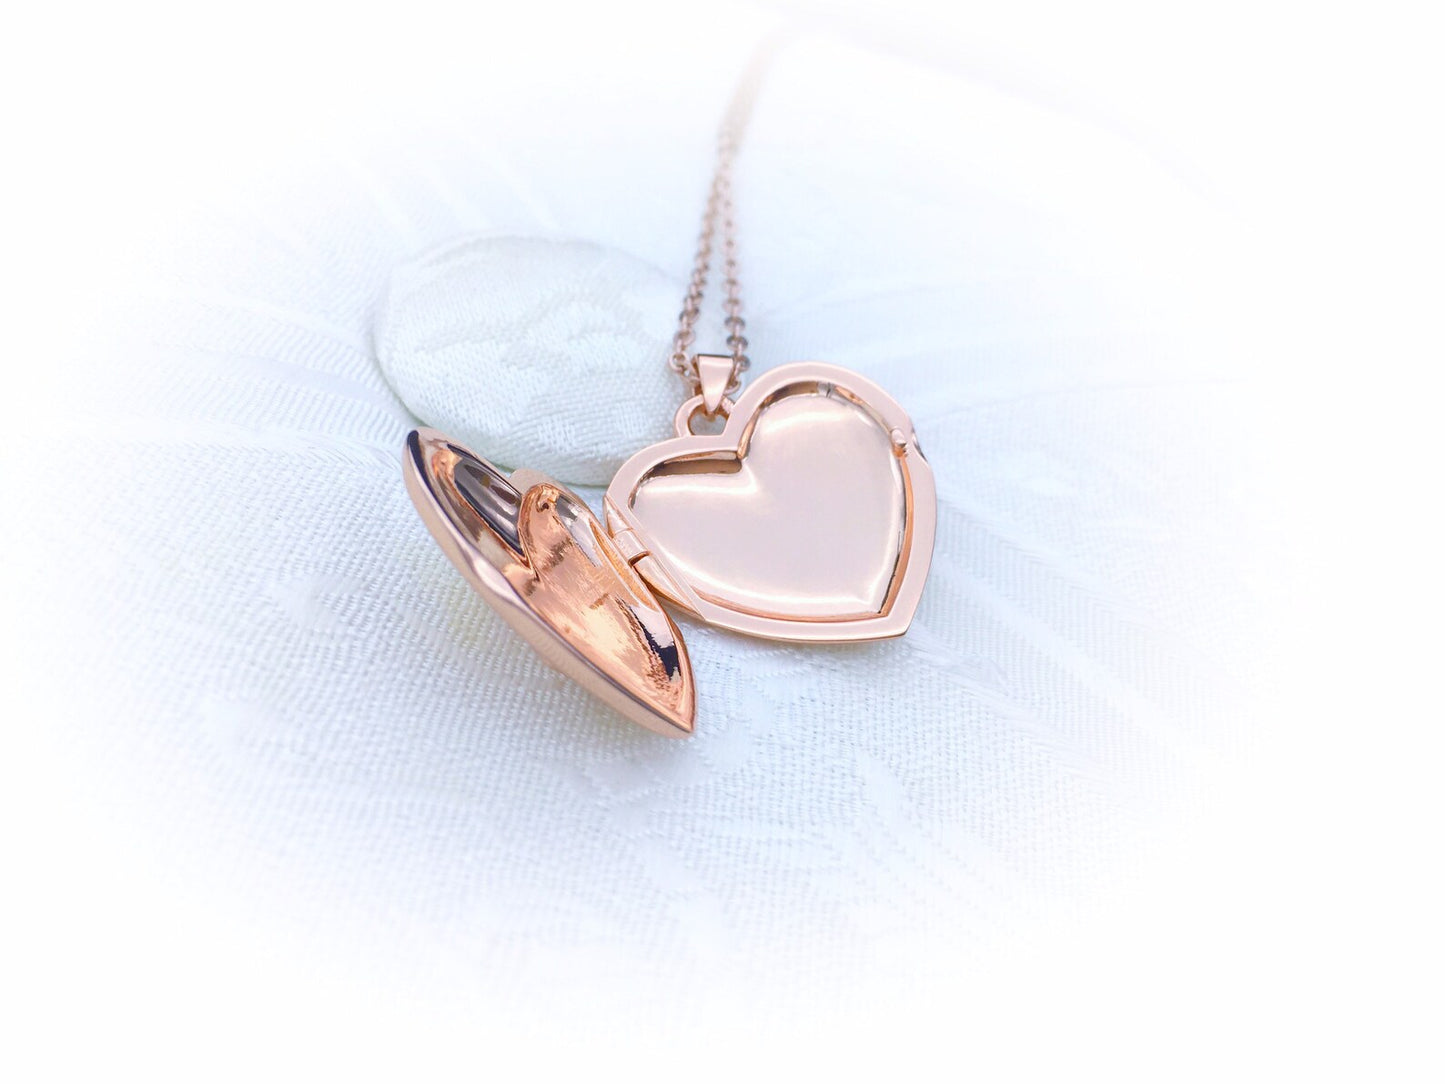 Princess Odette Necklace Openable Heart Pendant Swan The Spell of the Lake Locket Rose Gold Photo Frame